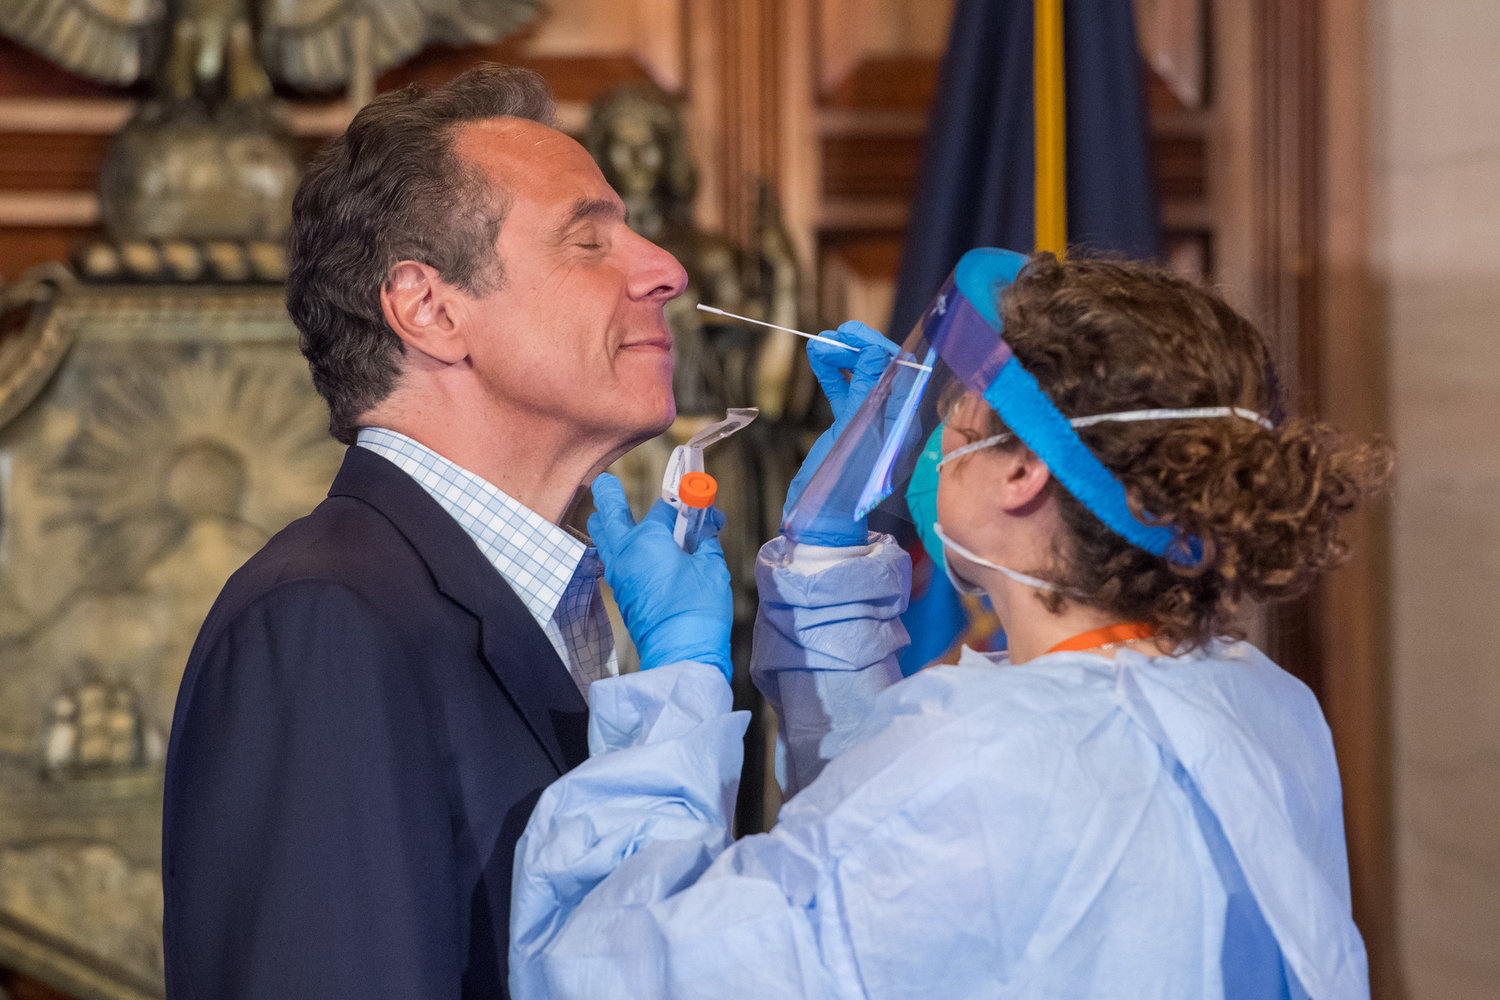 Dr. Elizabeth Dufort conducts a swab diagnostic test of Gov. Andrew Cuomo, looking to see if he has the virus that causes COVID-19. The test was part of a live demonstration Sunday during the governor's daily coronavirus media briefing.